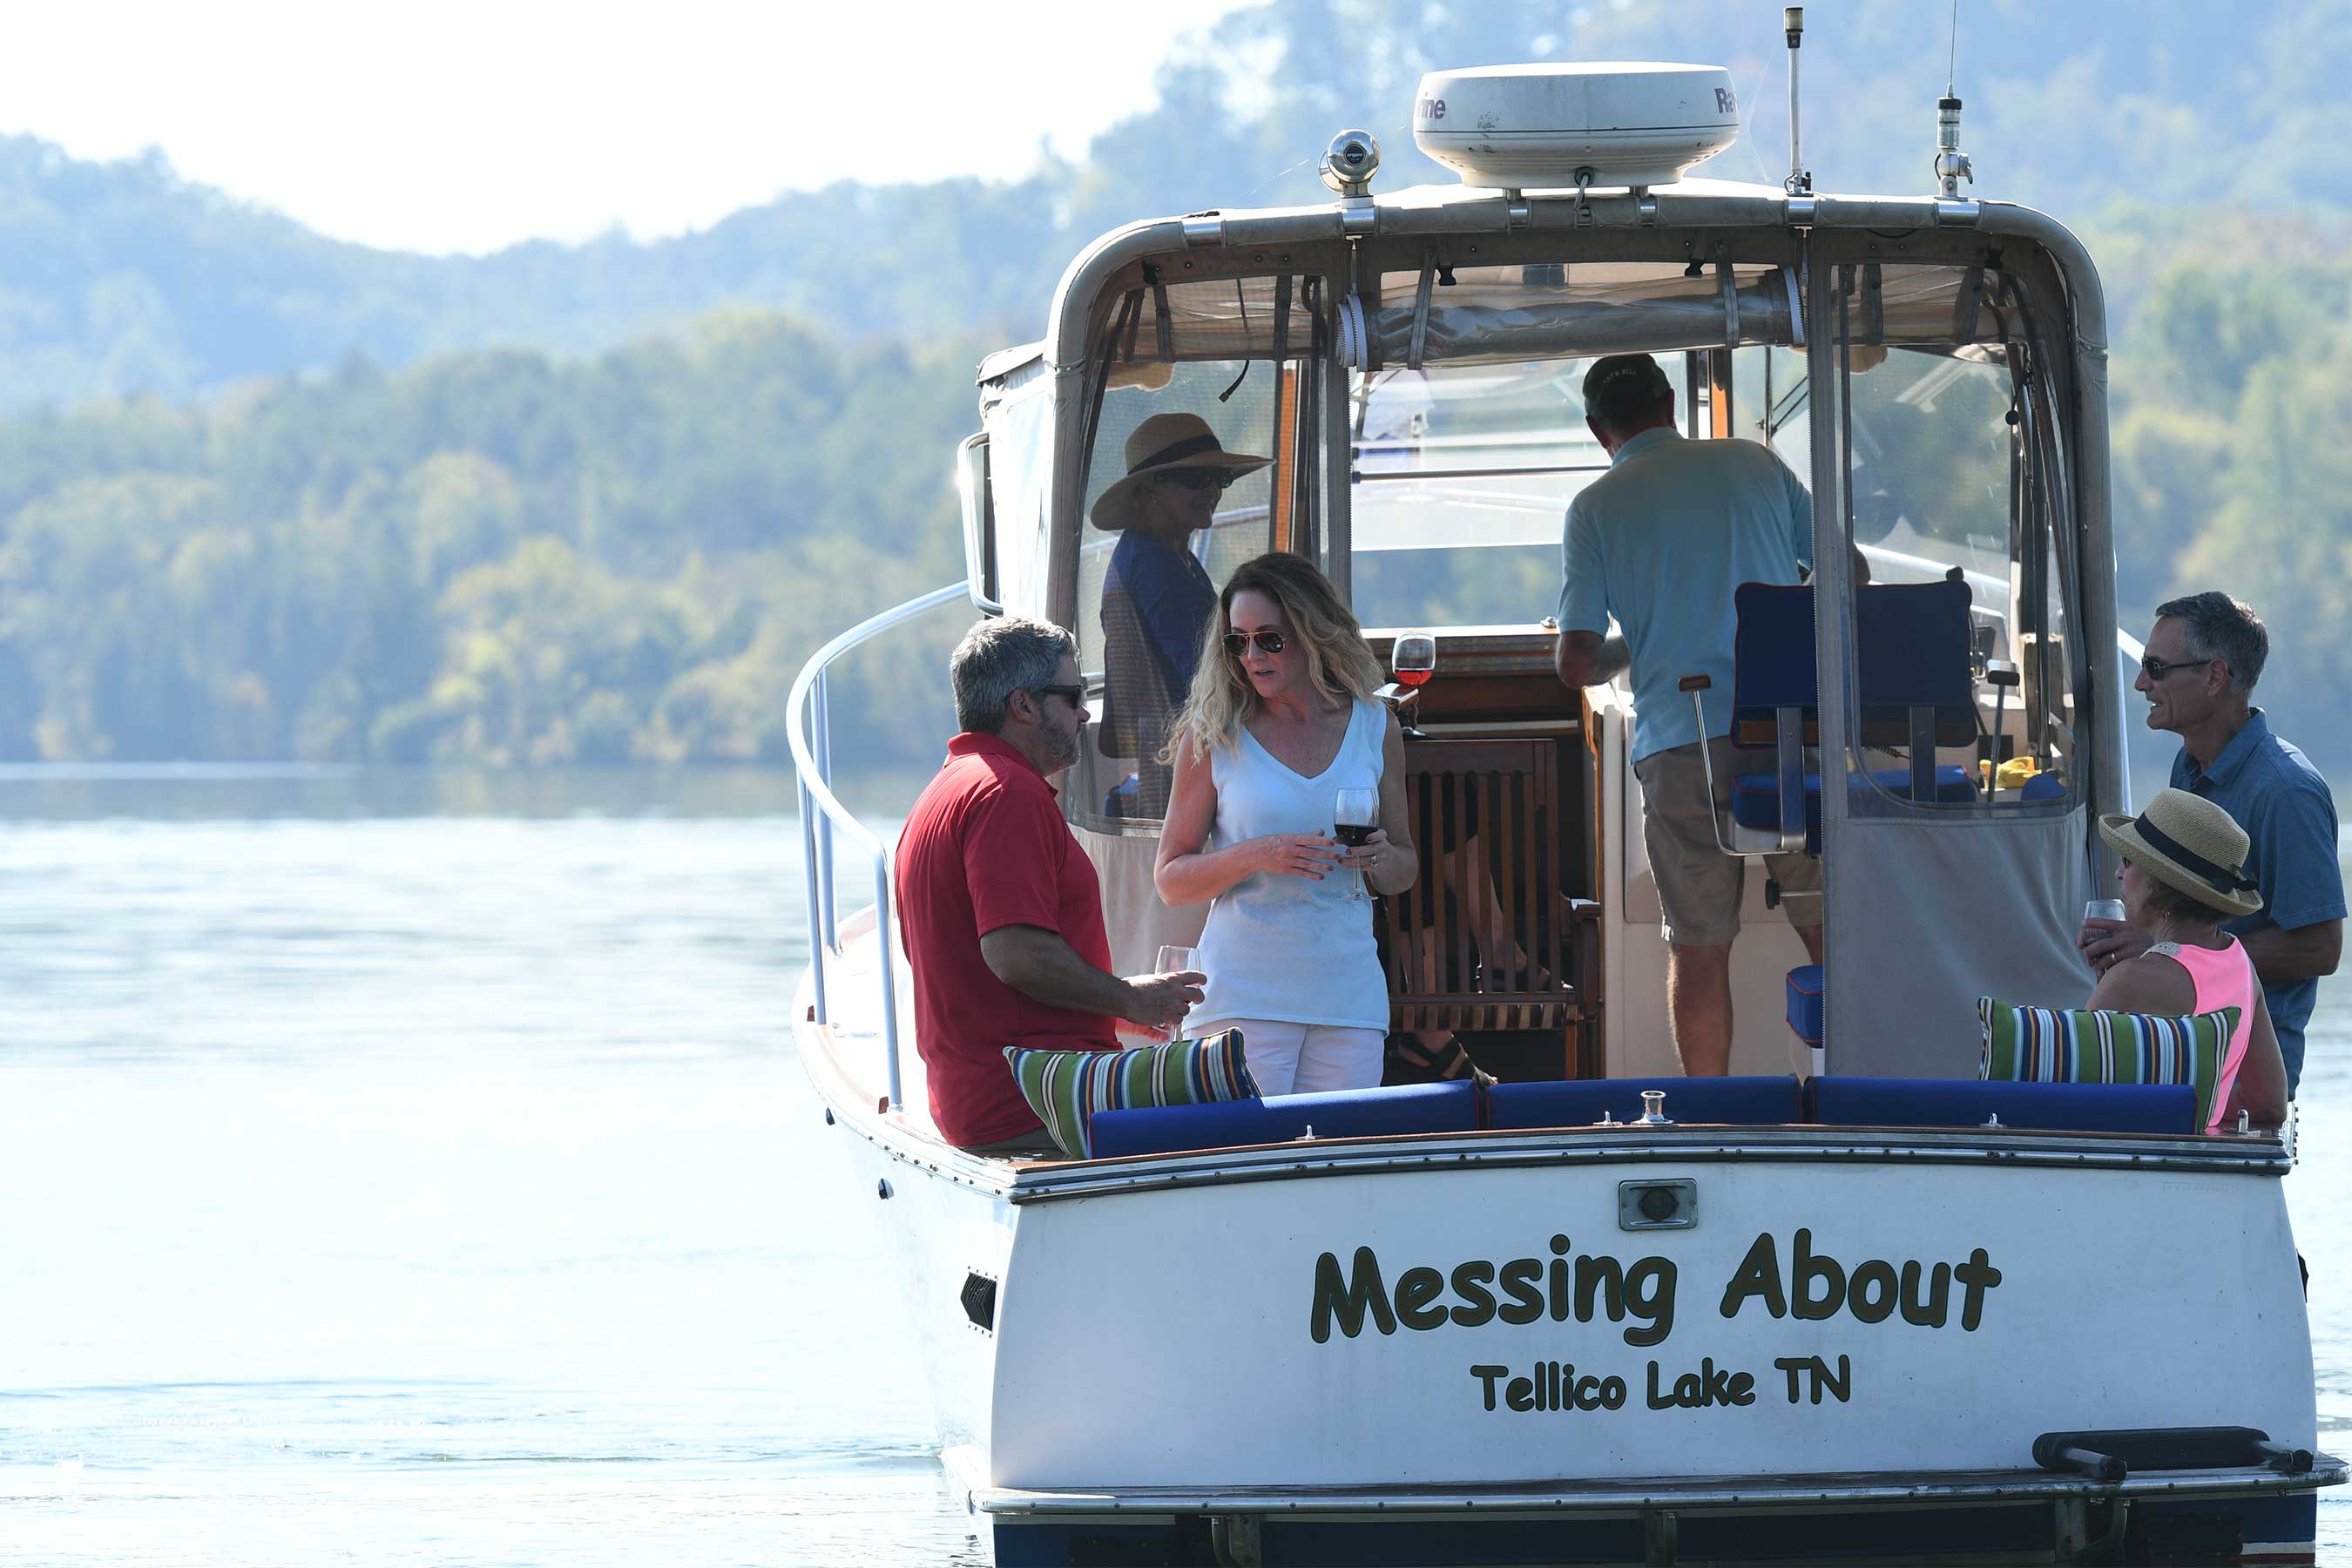 Tellico Village sits on nearly 5,000 acres along the shore of Tellico Lake one of the most pristine lakes in the region.